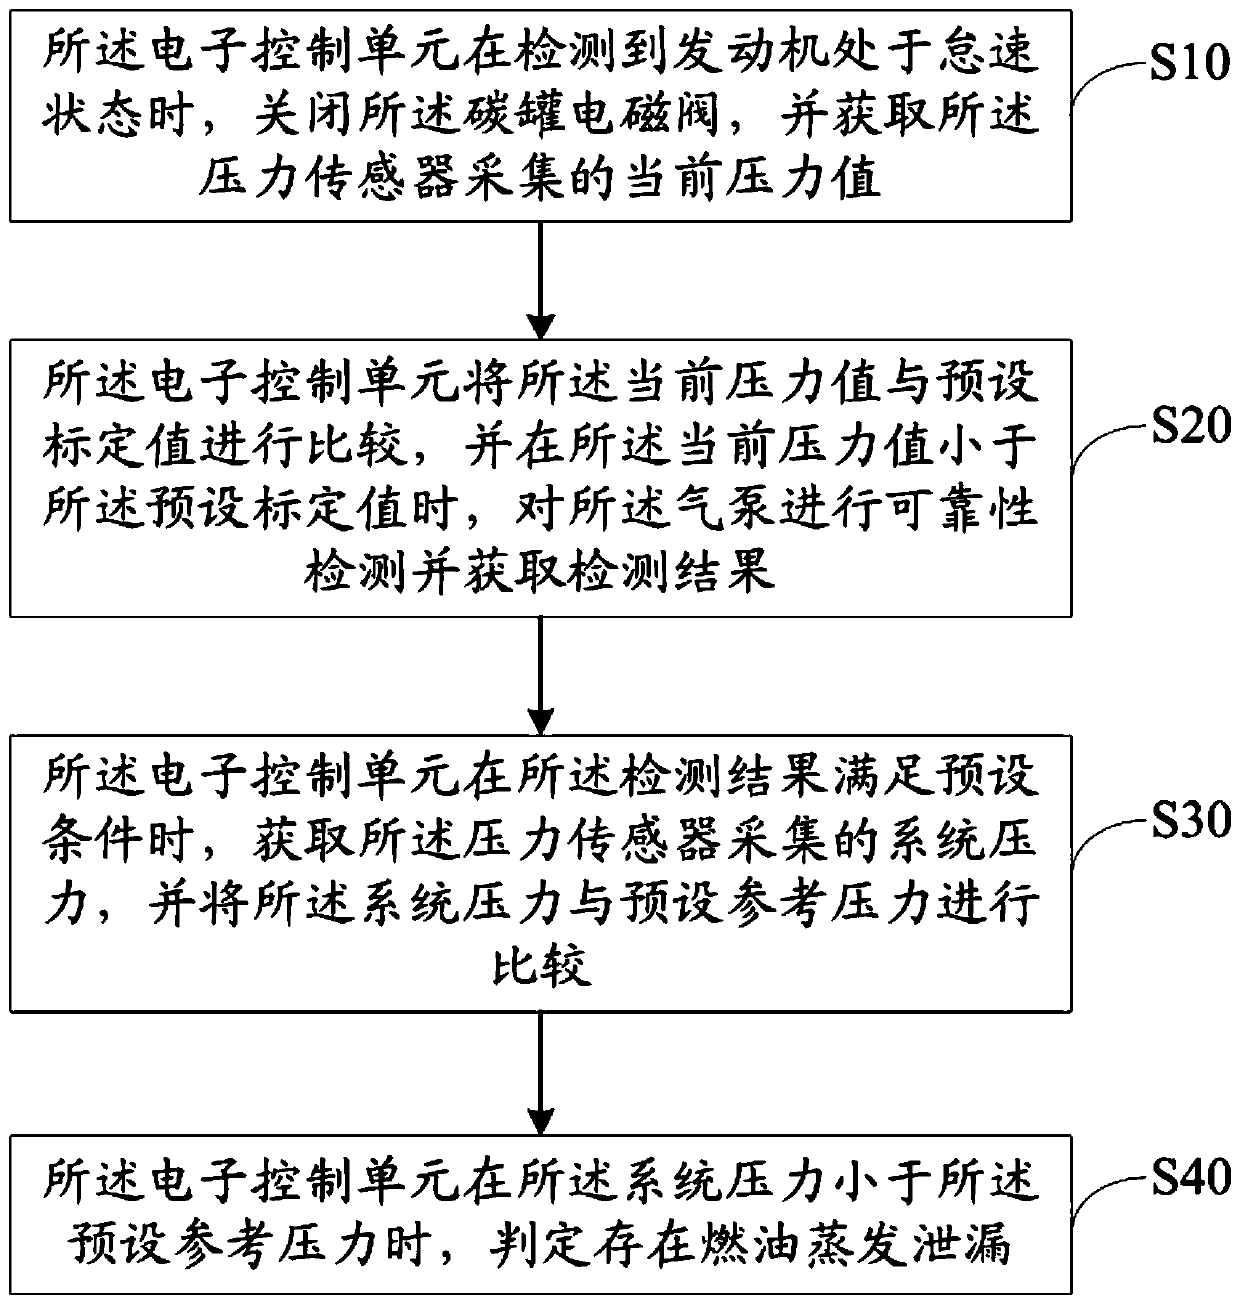 Fuel evaporation leakage detection system and method